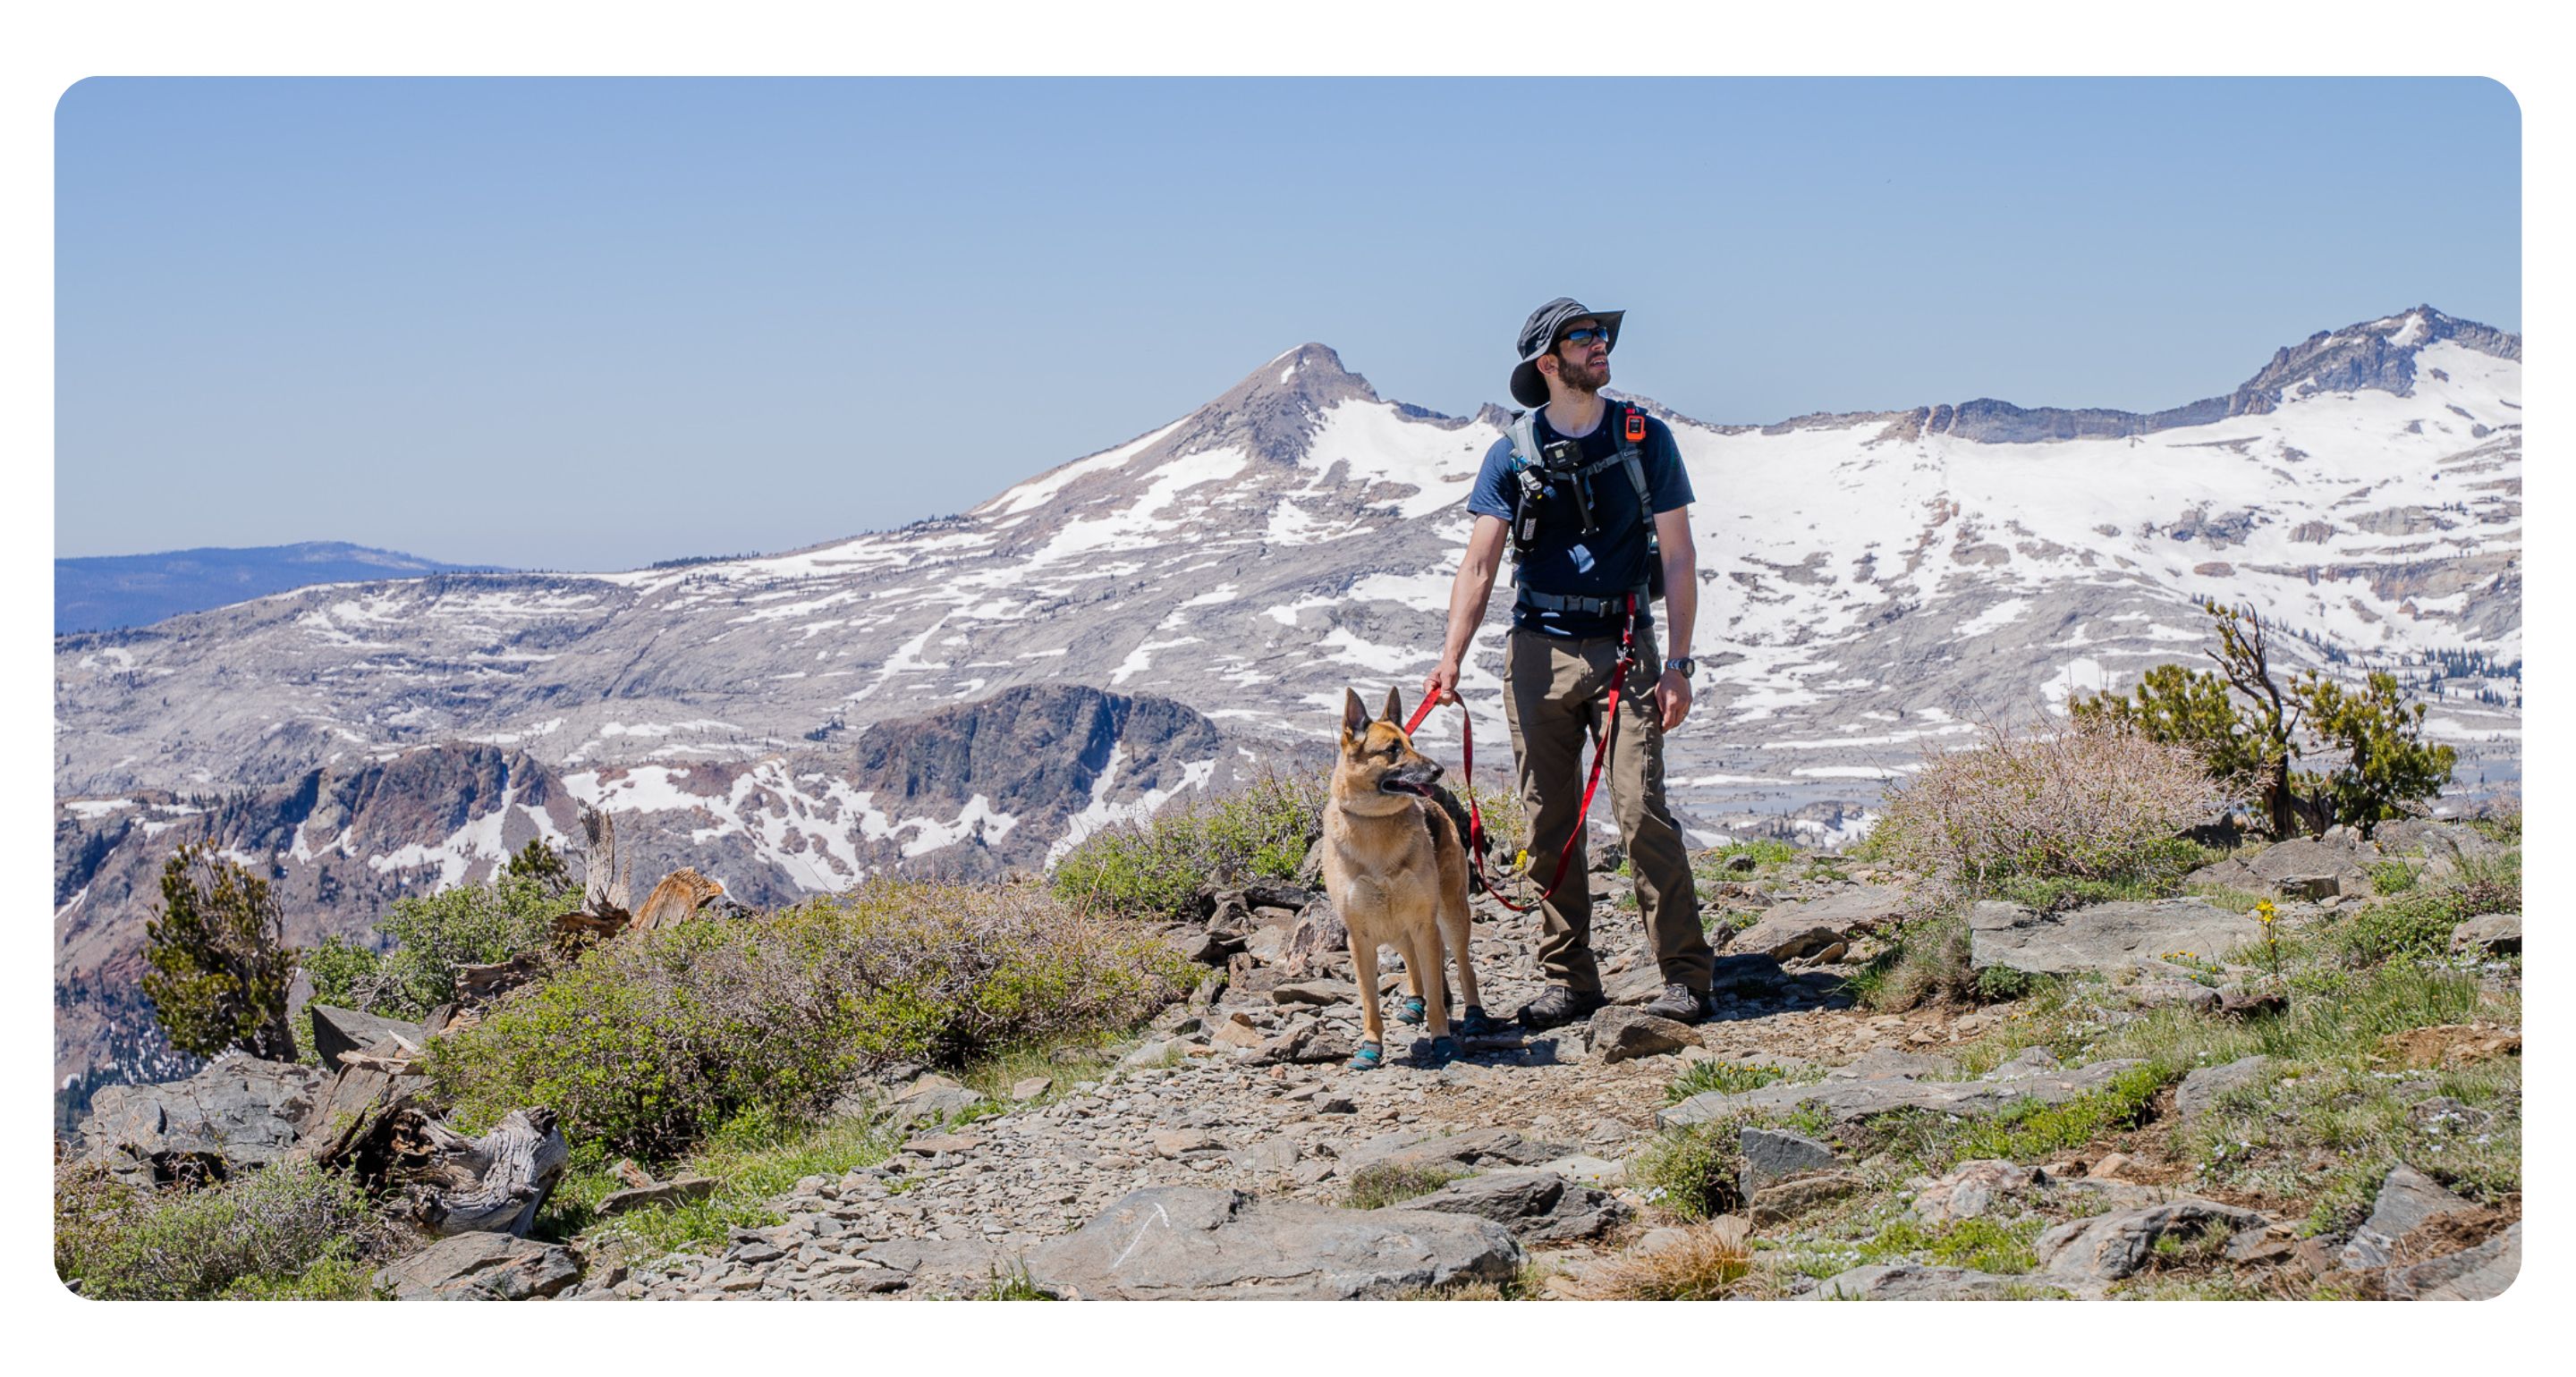 Man hiking with a dog on a snow tipped mountain scene.